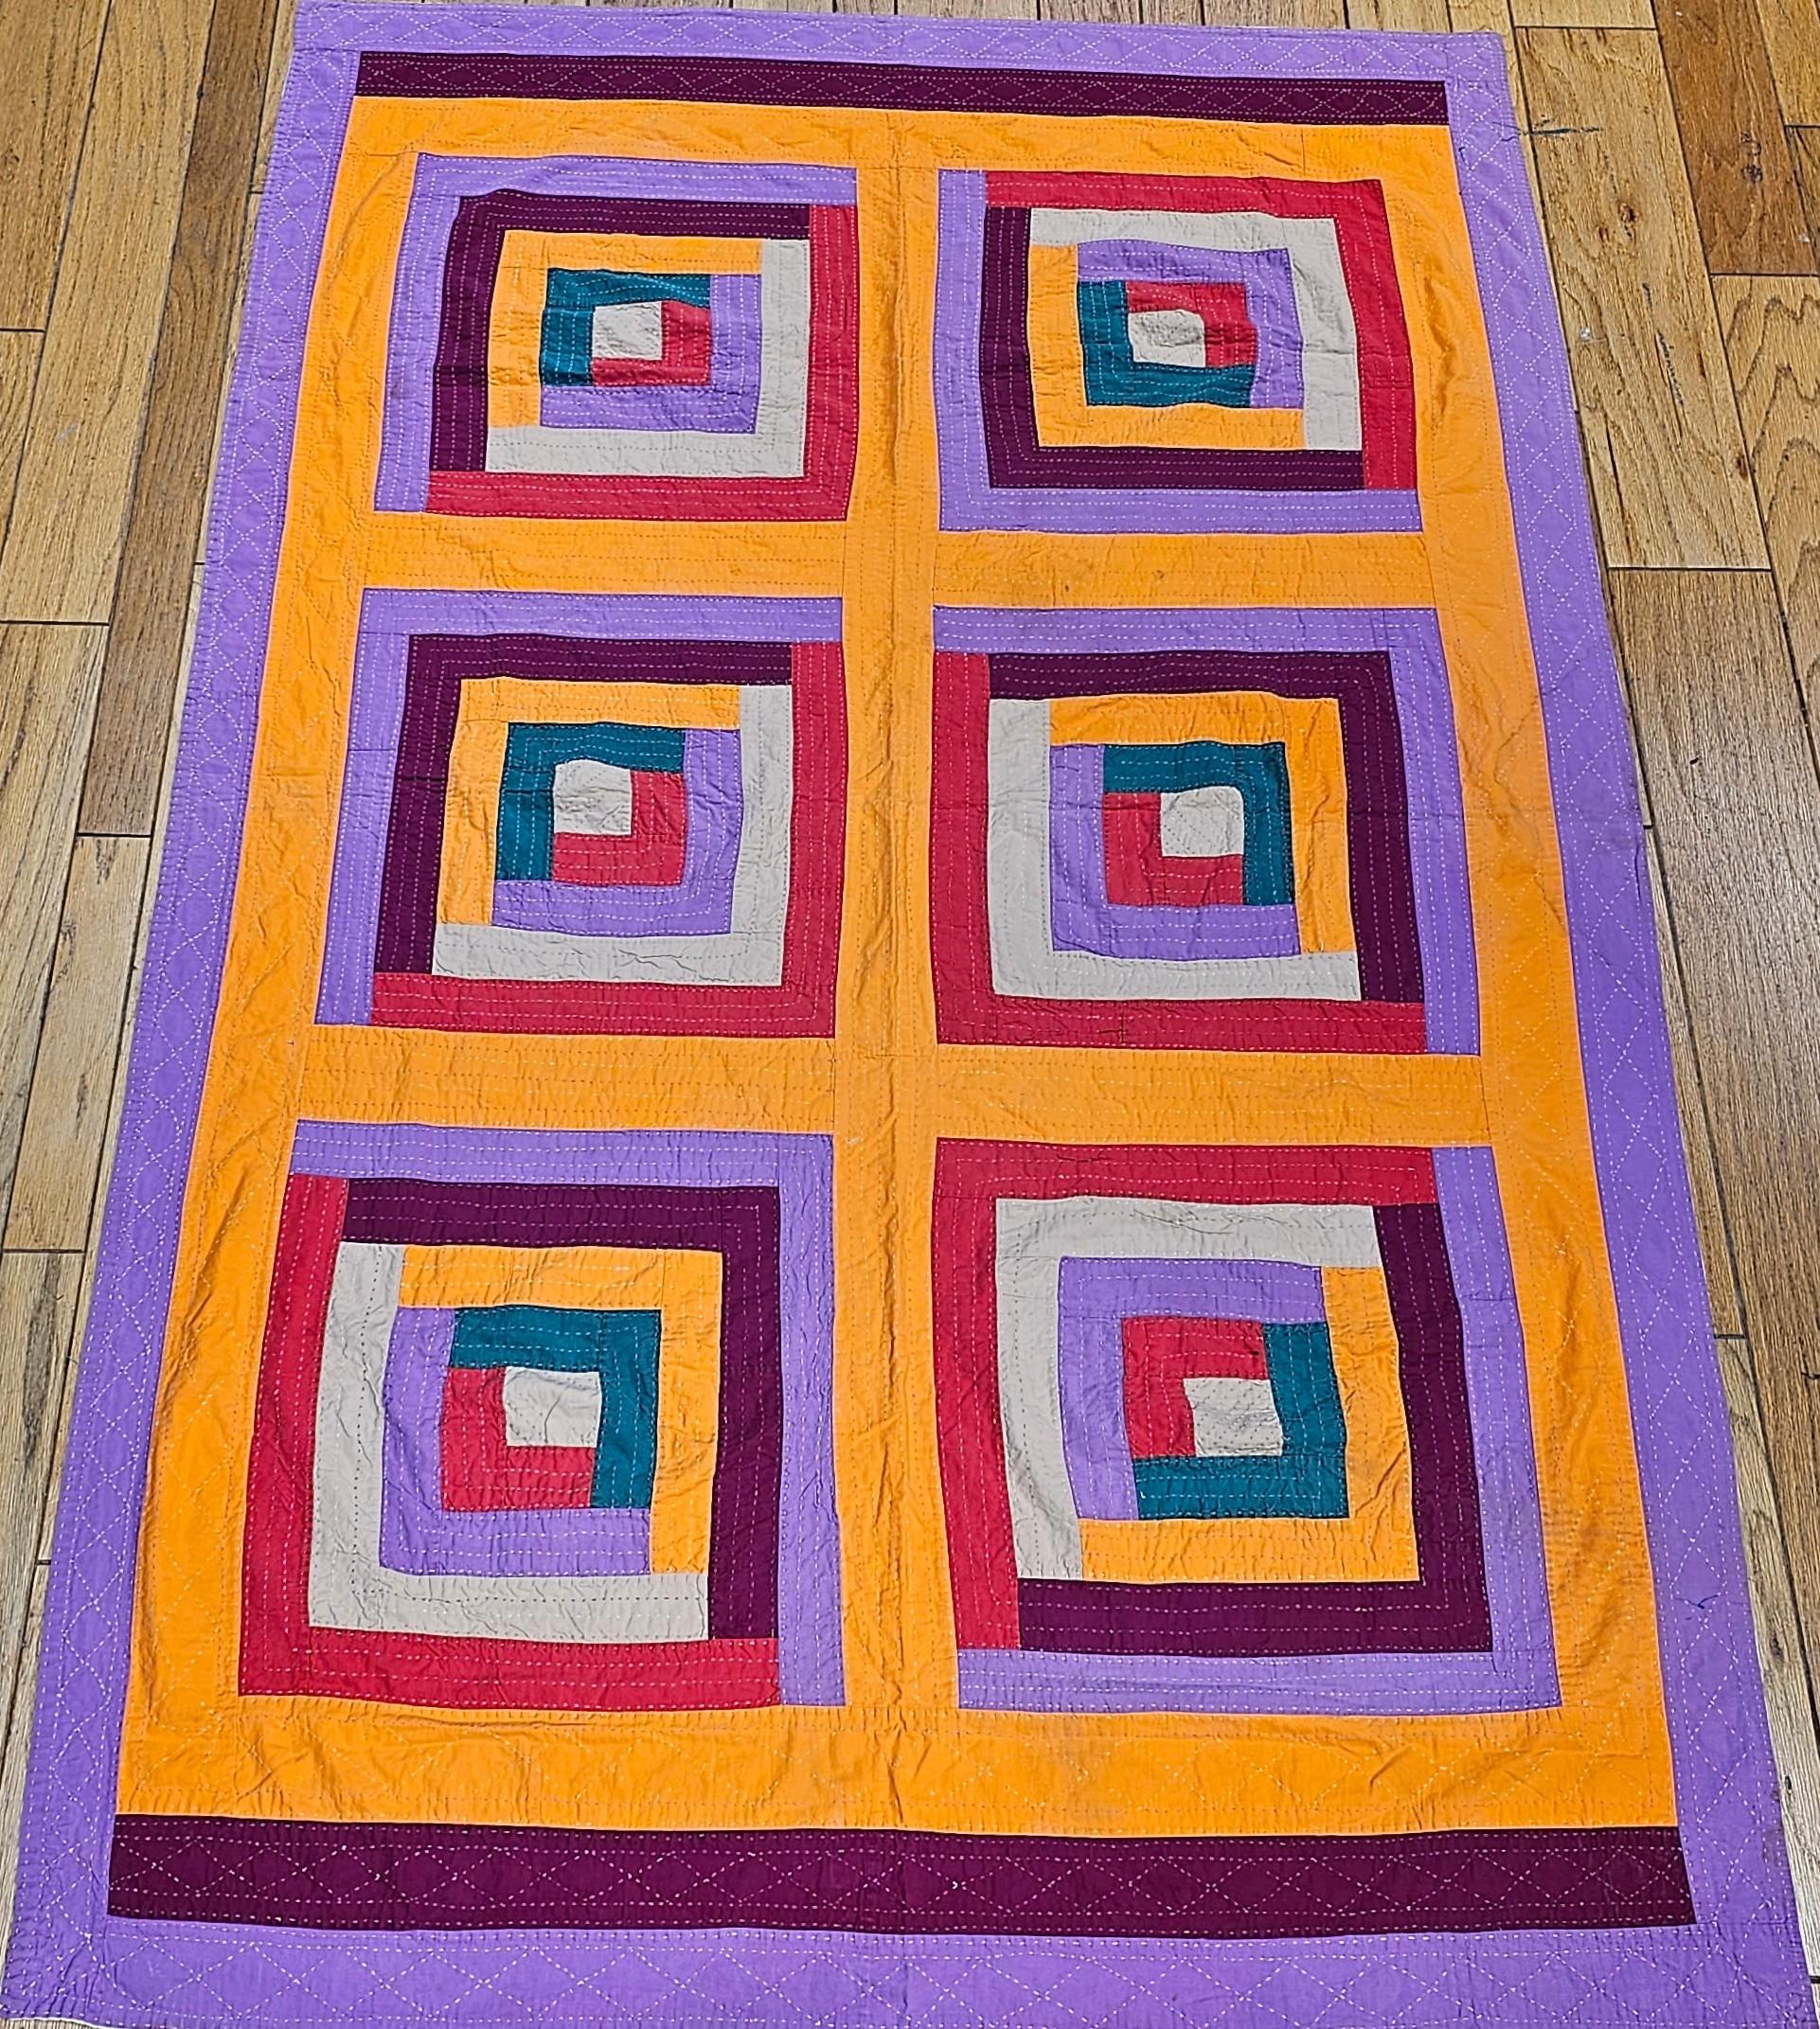 African American Southern hand stitched quilt from the mid 20th century.  This wonderful geometric pattern quilt is very similar in design to the 19th and early 20th century quilts made by African Americans in Gee's Bend, Alabama in the Southern